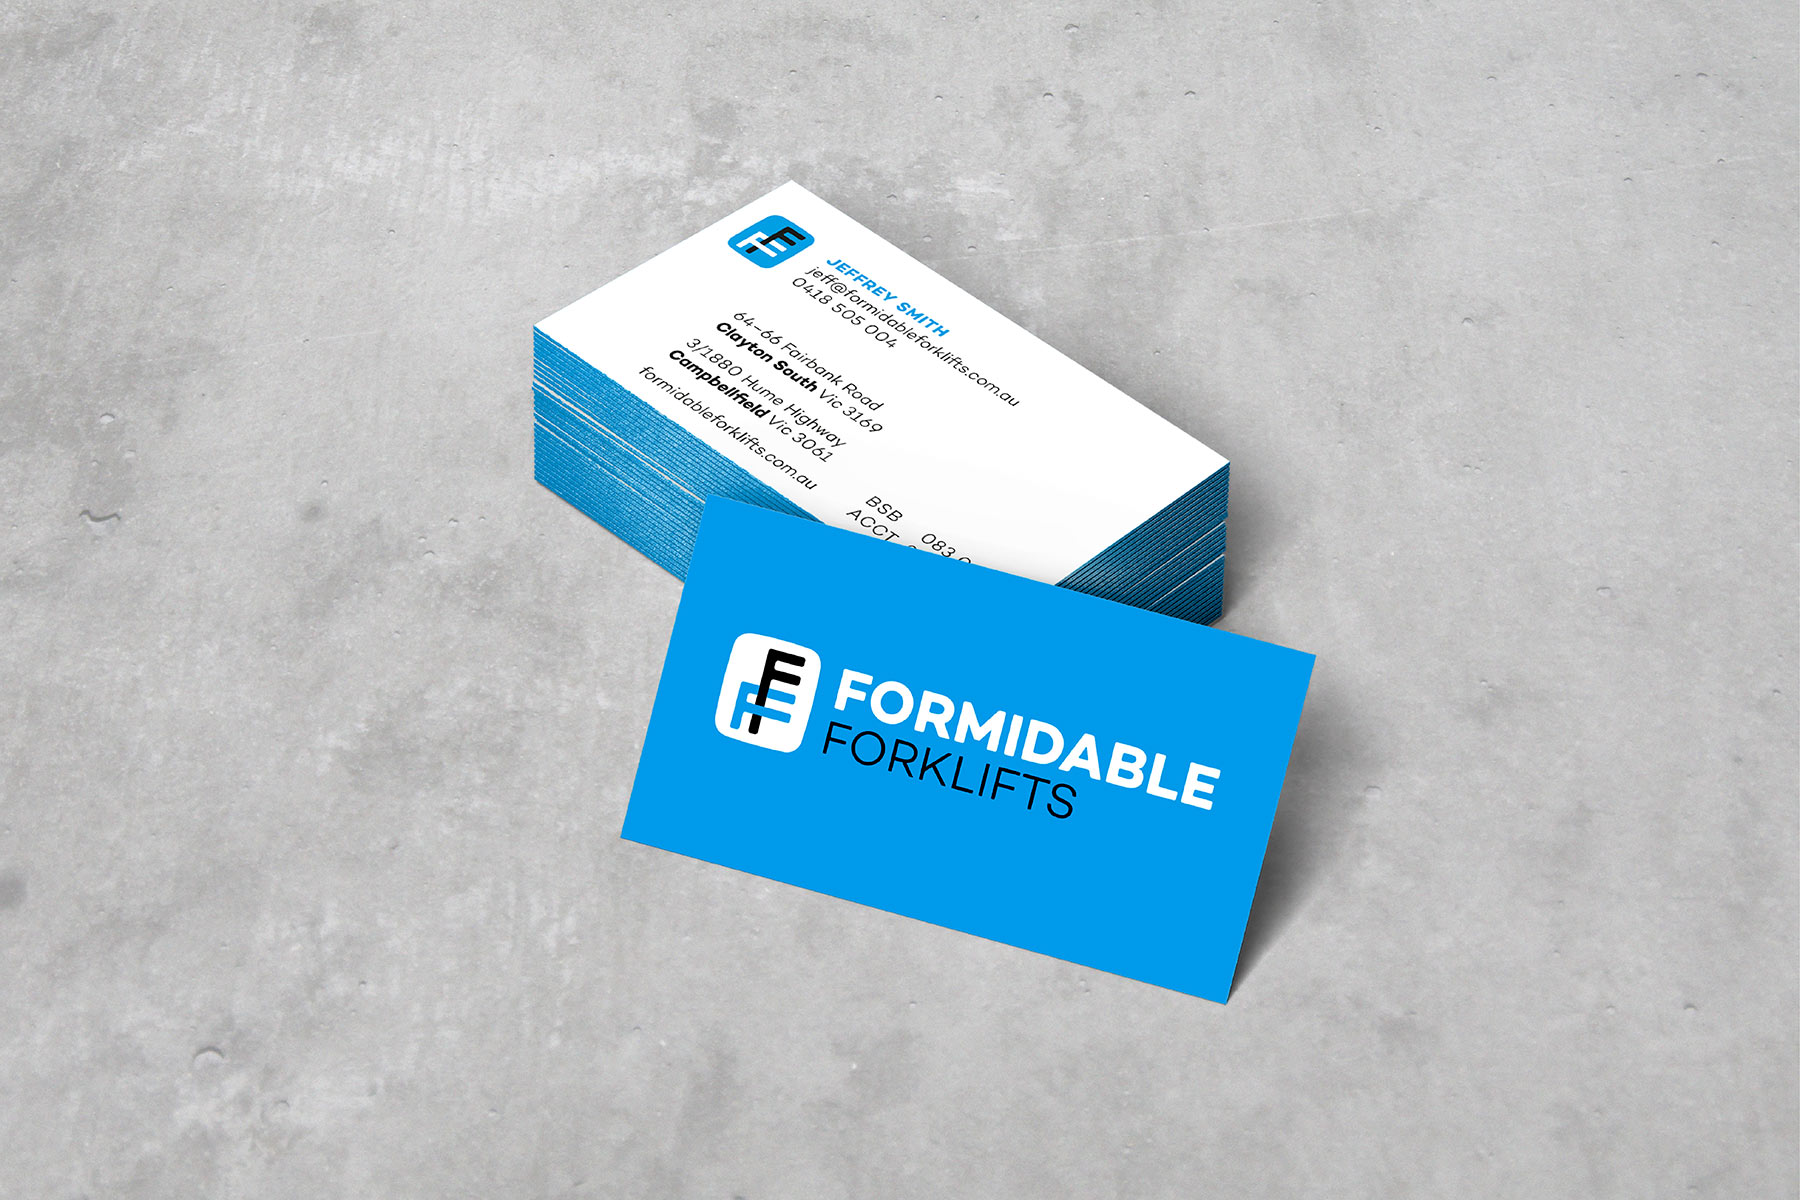 Formidable Forklifts business cards